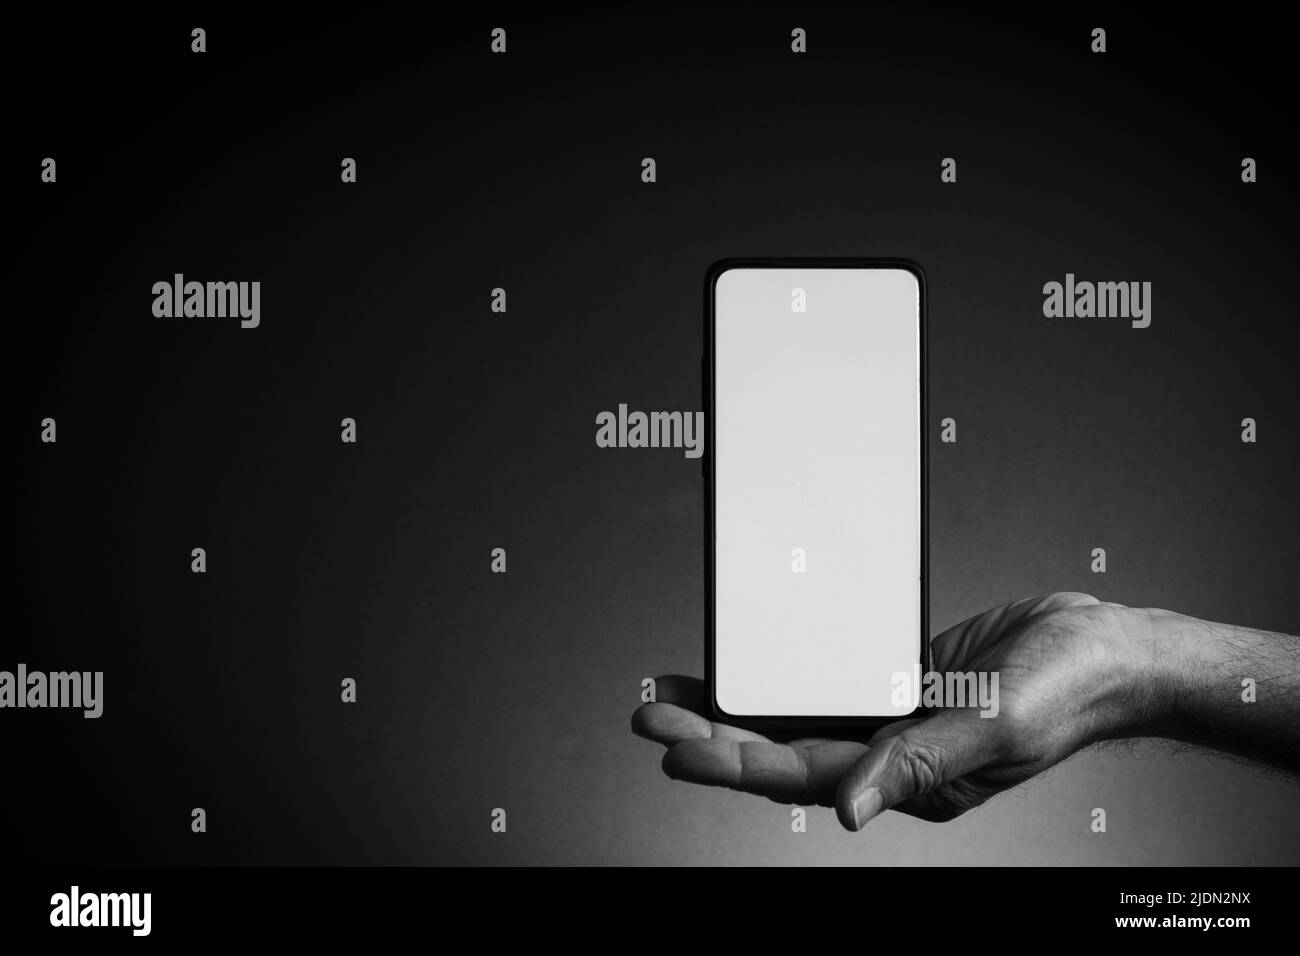 Black and white image of man's hand held out holding black smartphone on palm with blank white screen isolated on dark background with dramatic lighti Stock Photo